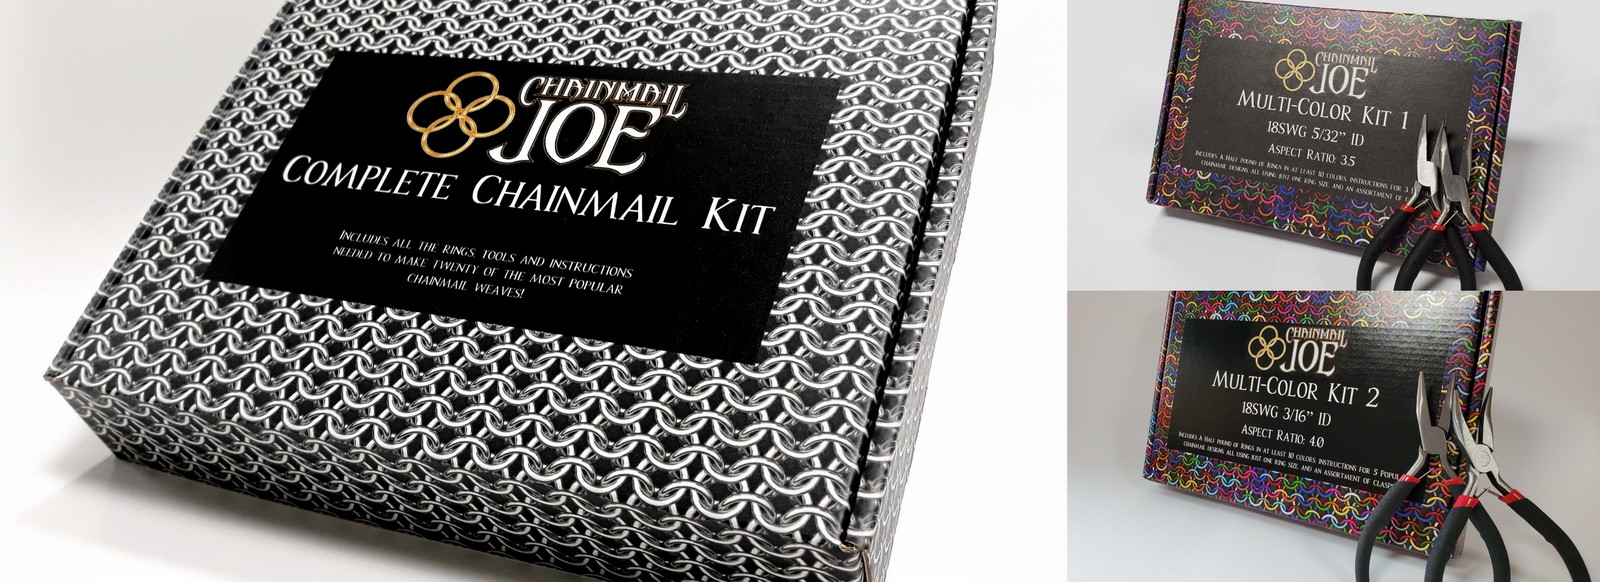  Chainmail Joe European 4 in 1, Round Mail, Sweet Pea, and  Spiral 4 in 1 Multi-Color/Weave Kit with a Half Pound of Rings(4,000 Rings)  in at Least 10 Colors, No Pliers 